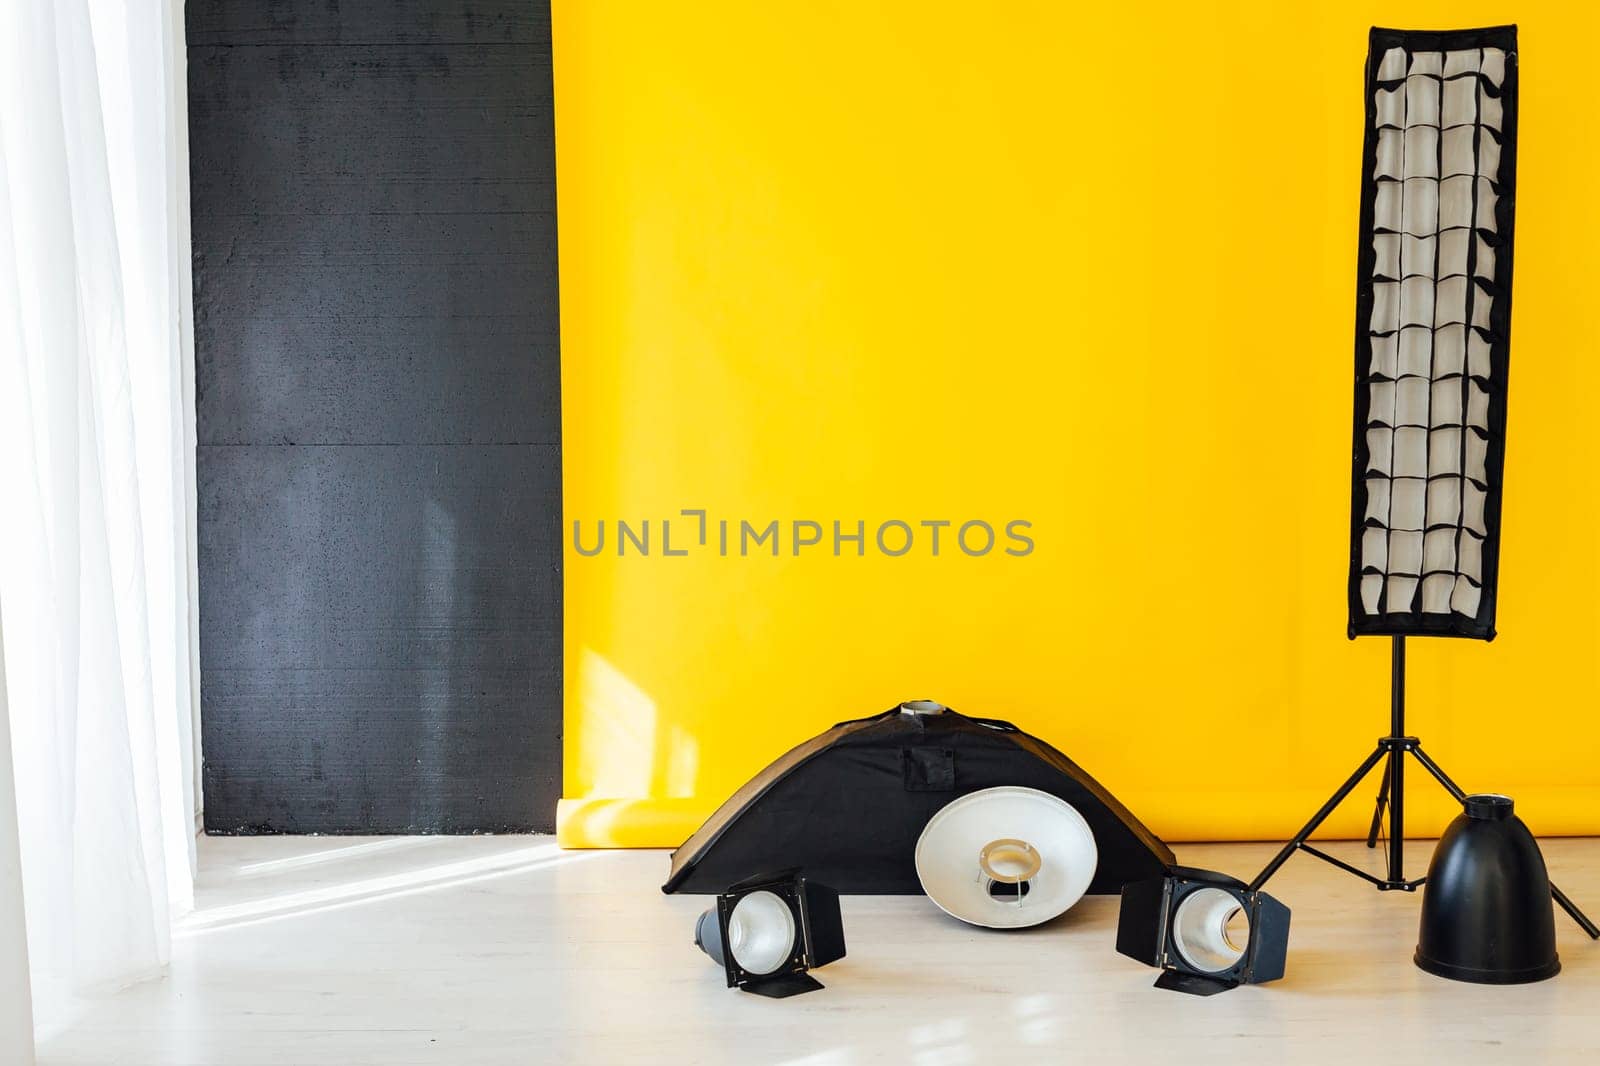 flash and accessories photo studio on a yellow background by Simakov